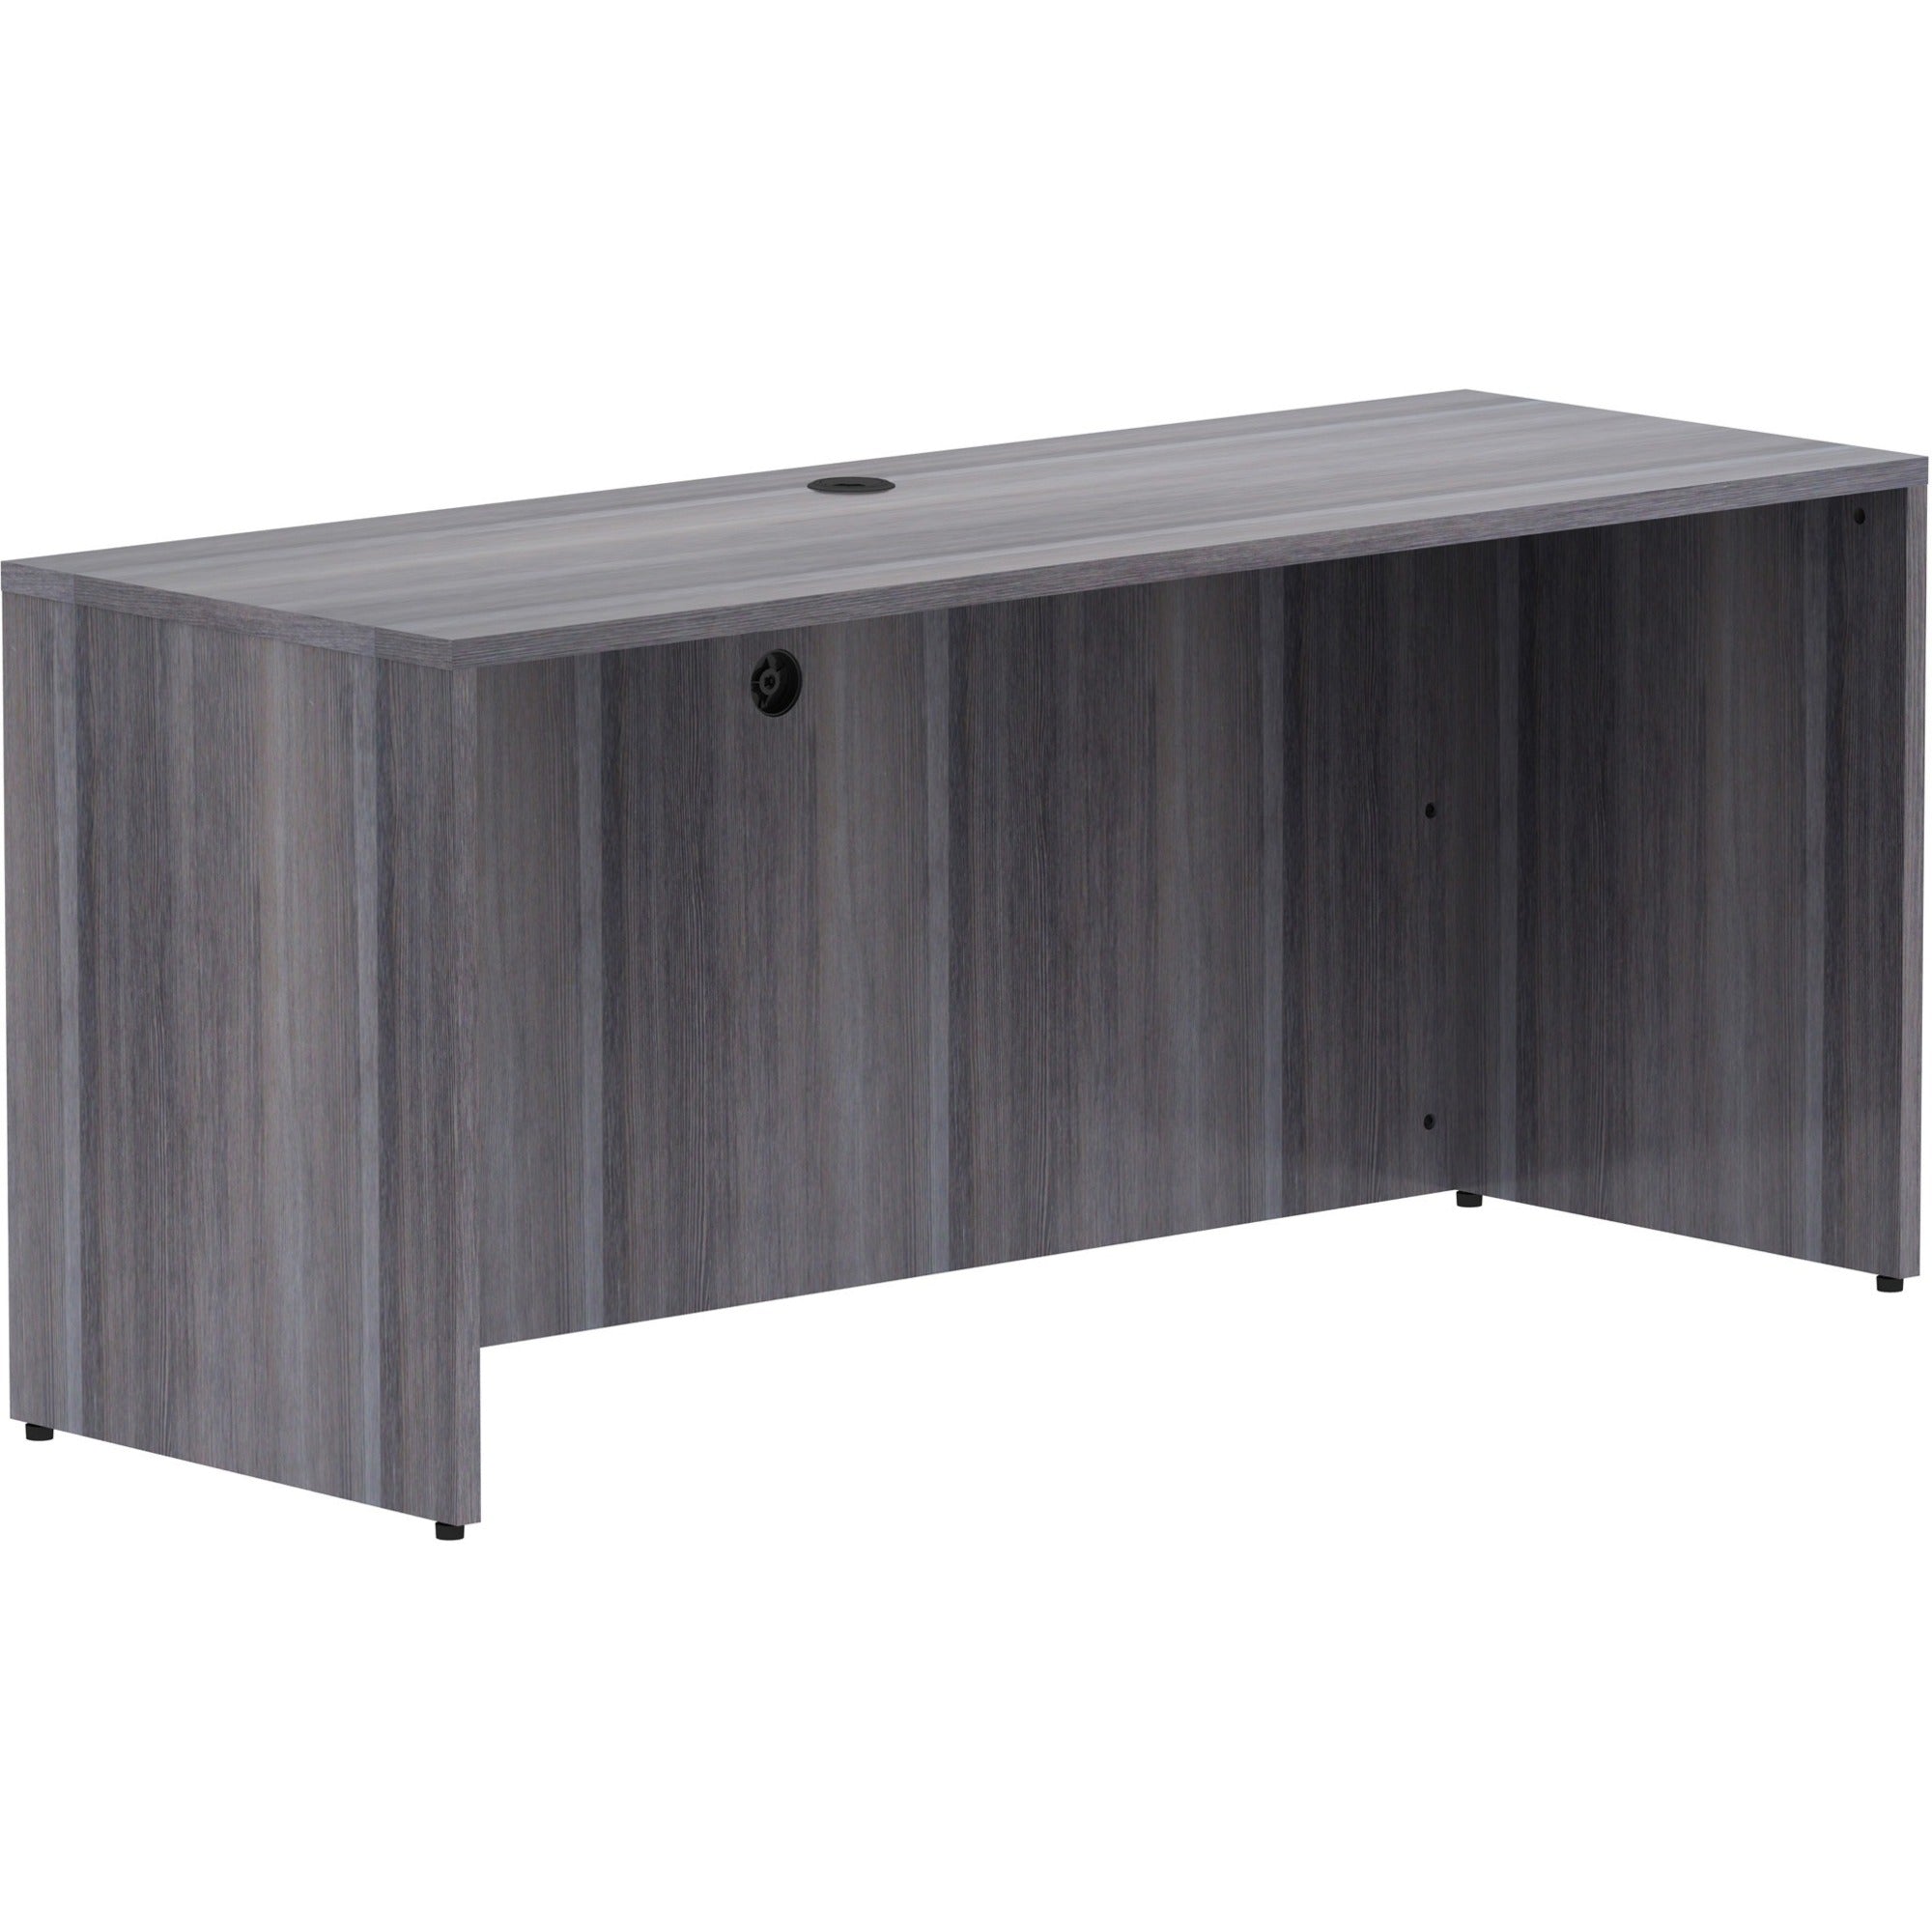 lorell-essentials-series-credenza-shell-66-x-24295-credenza-shell-1-top-finish-weathered-charcoal-laminate-silver-brush_llr69596 - 1